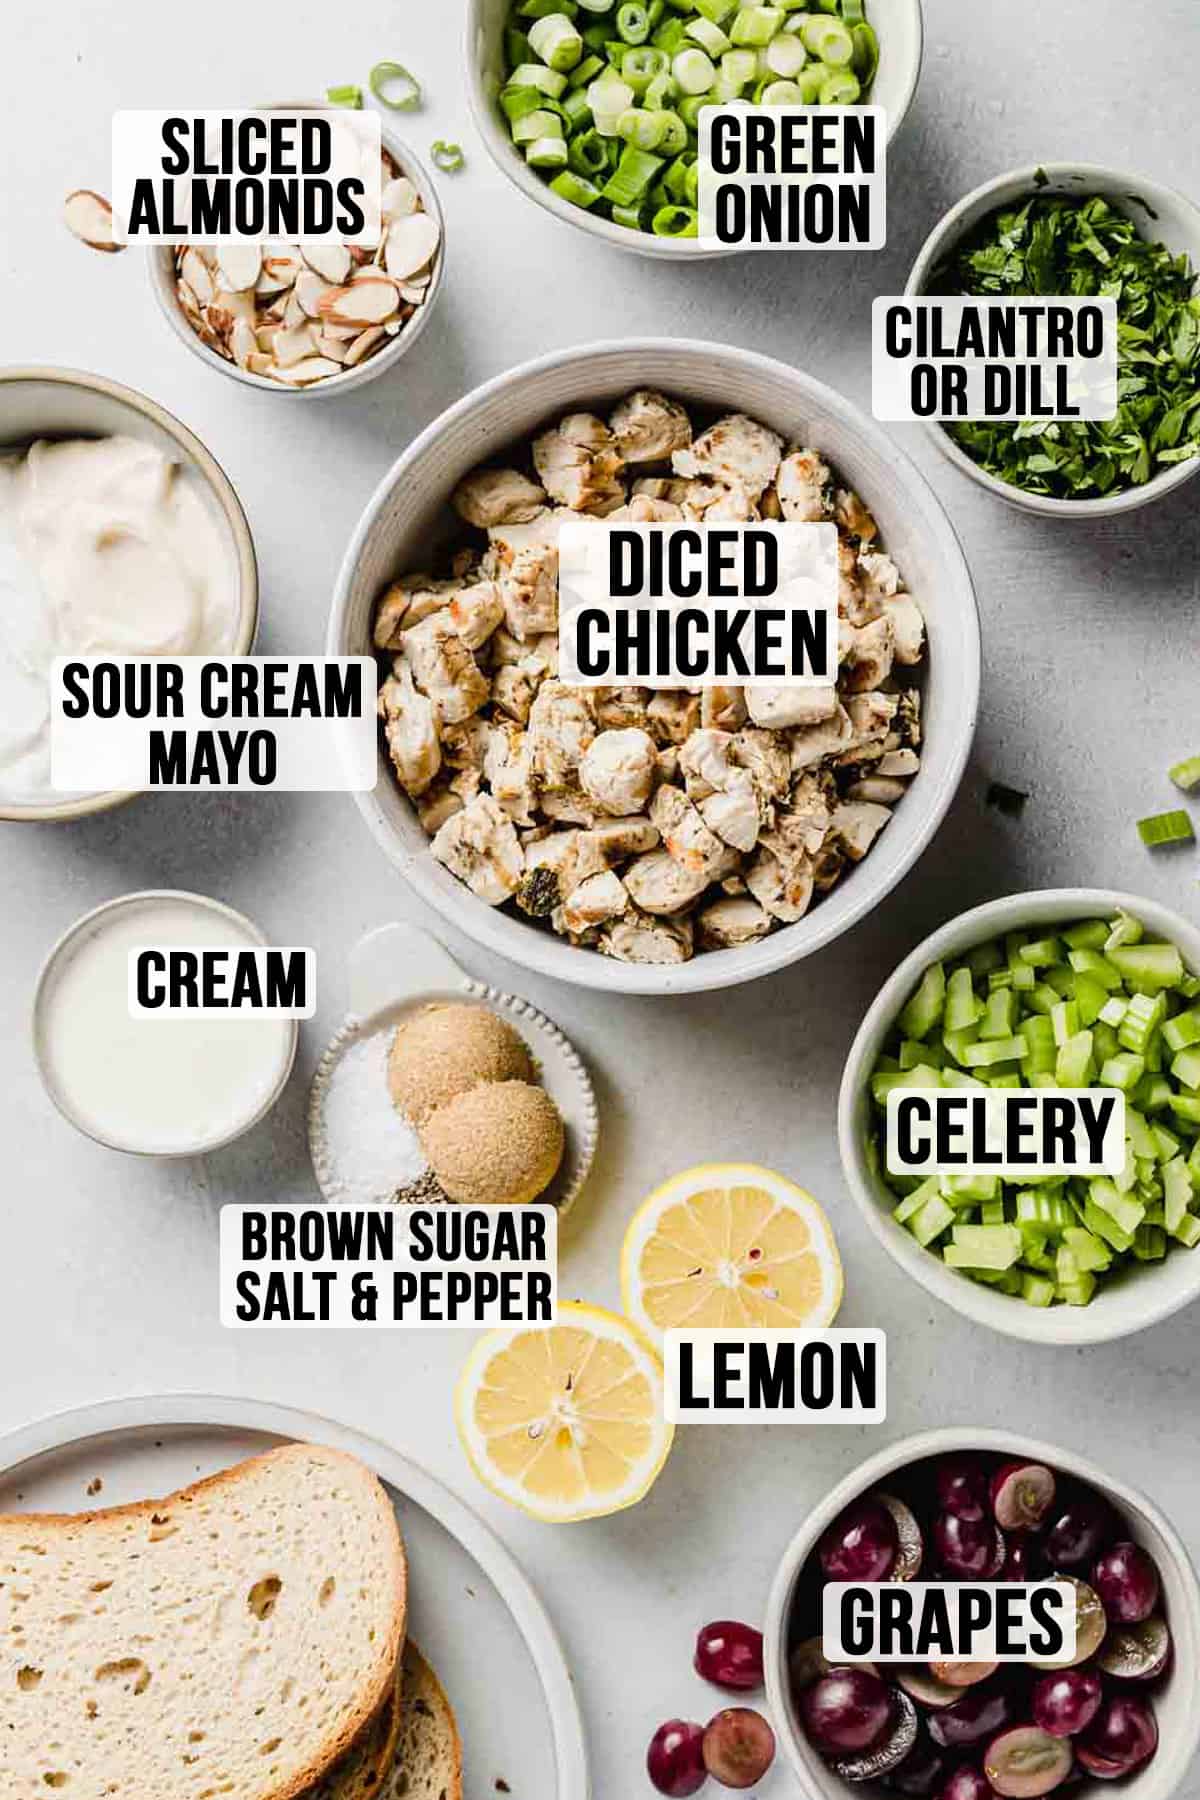 Ingredients for chicken salad measured out in bowls on white surface.